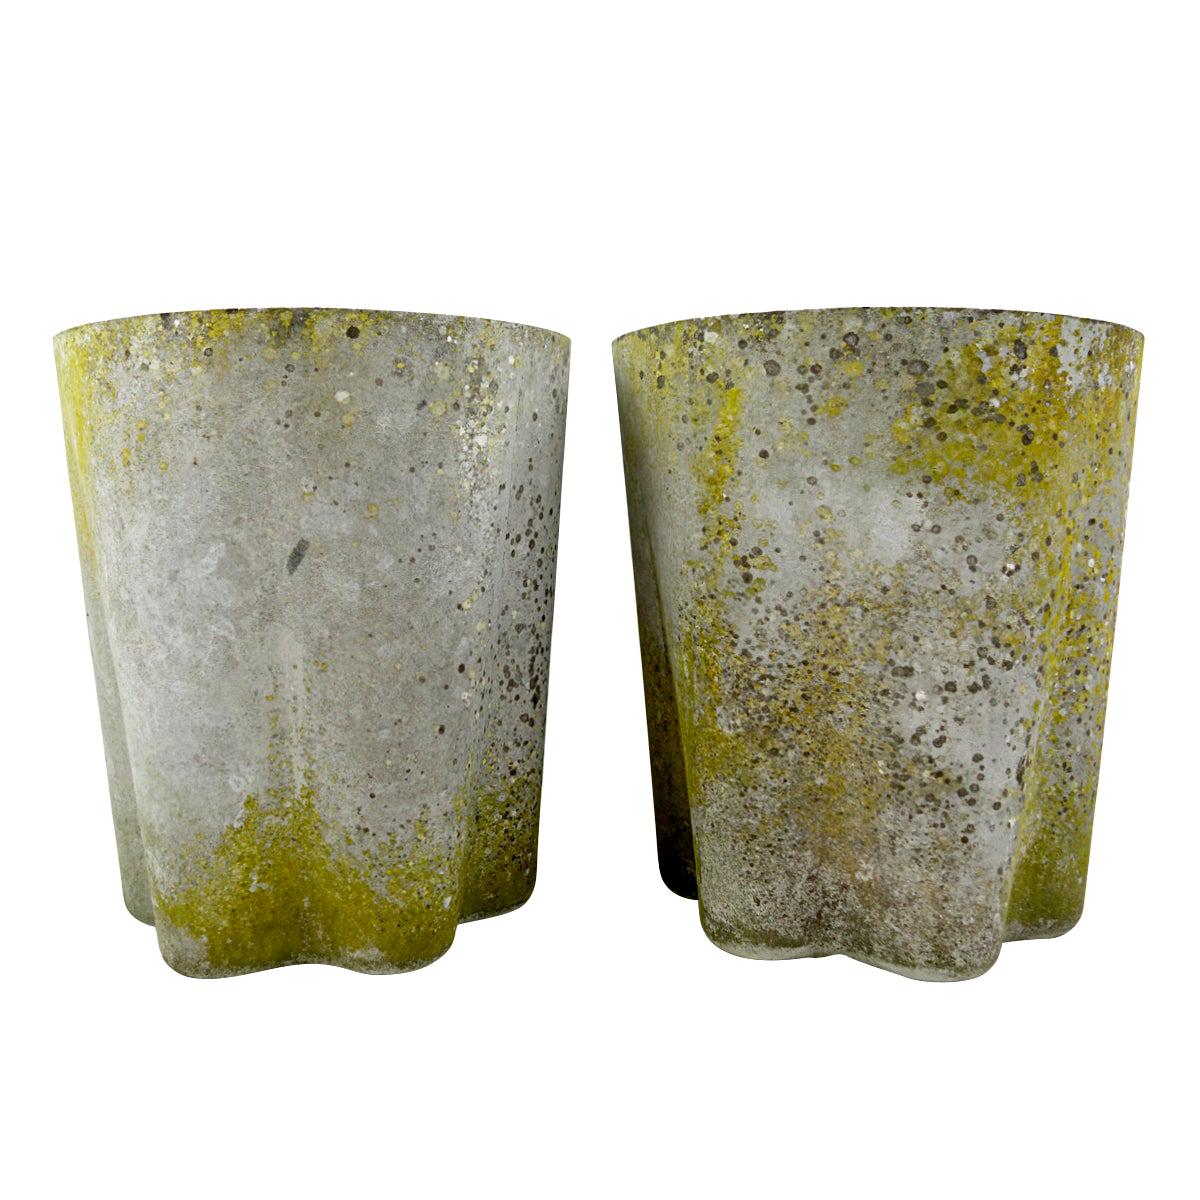 Pair of Big Midcentury Flower Shaped Planters by Willy Guhl for Eternit